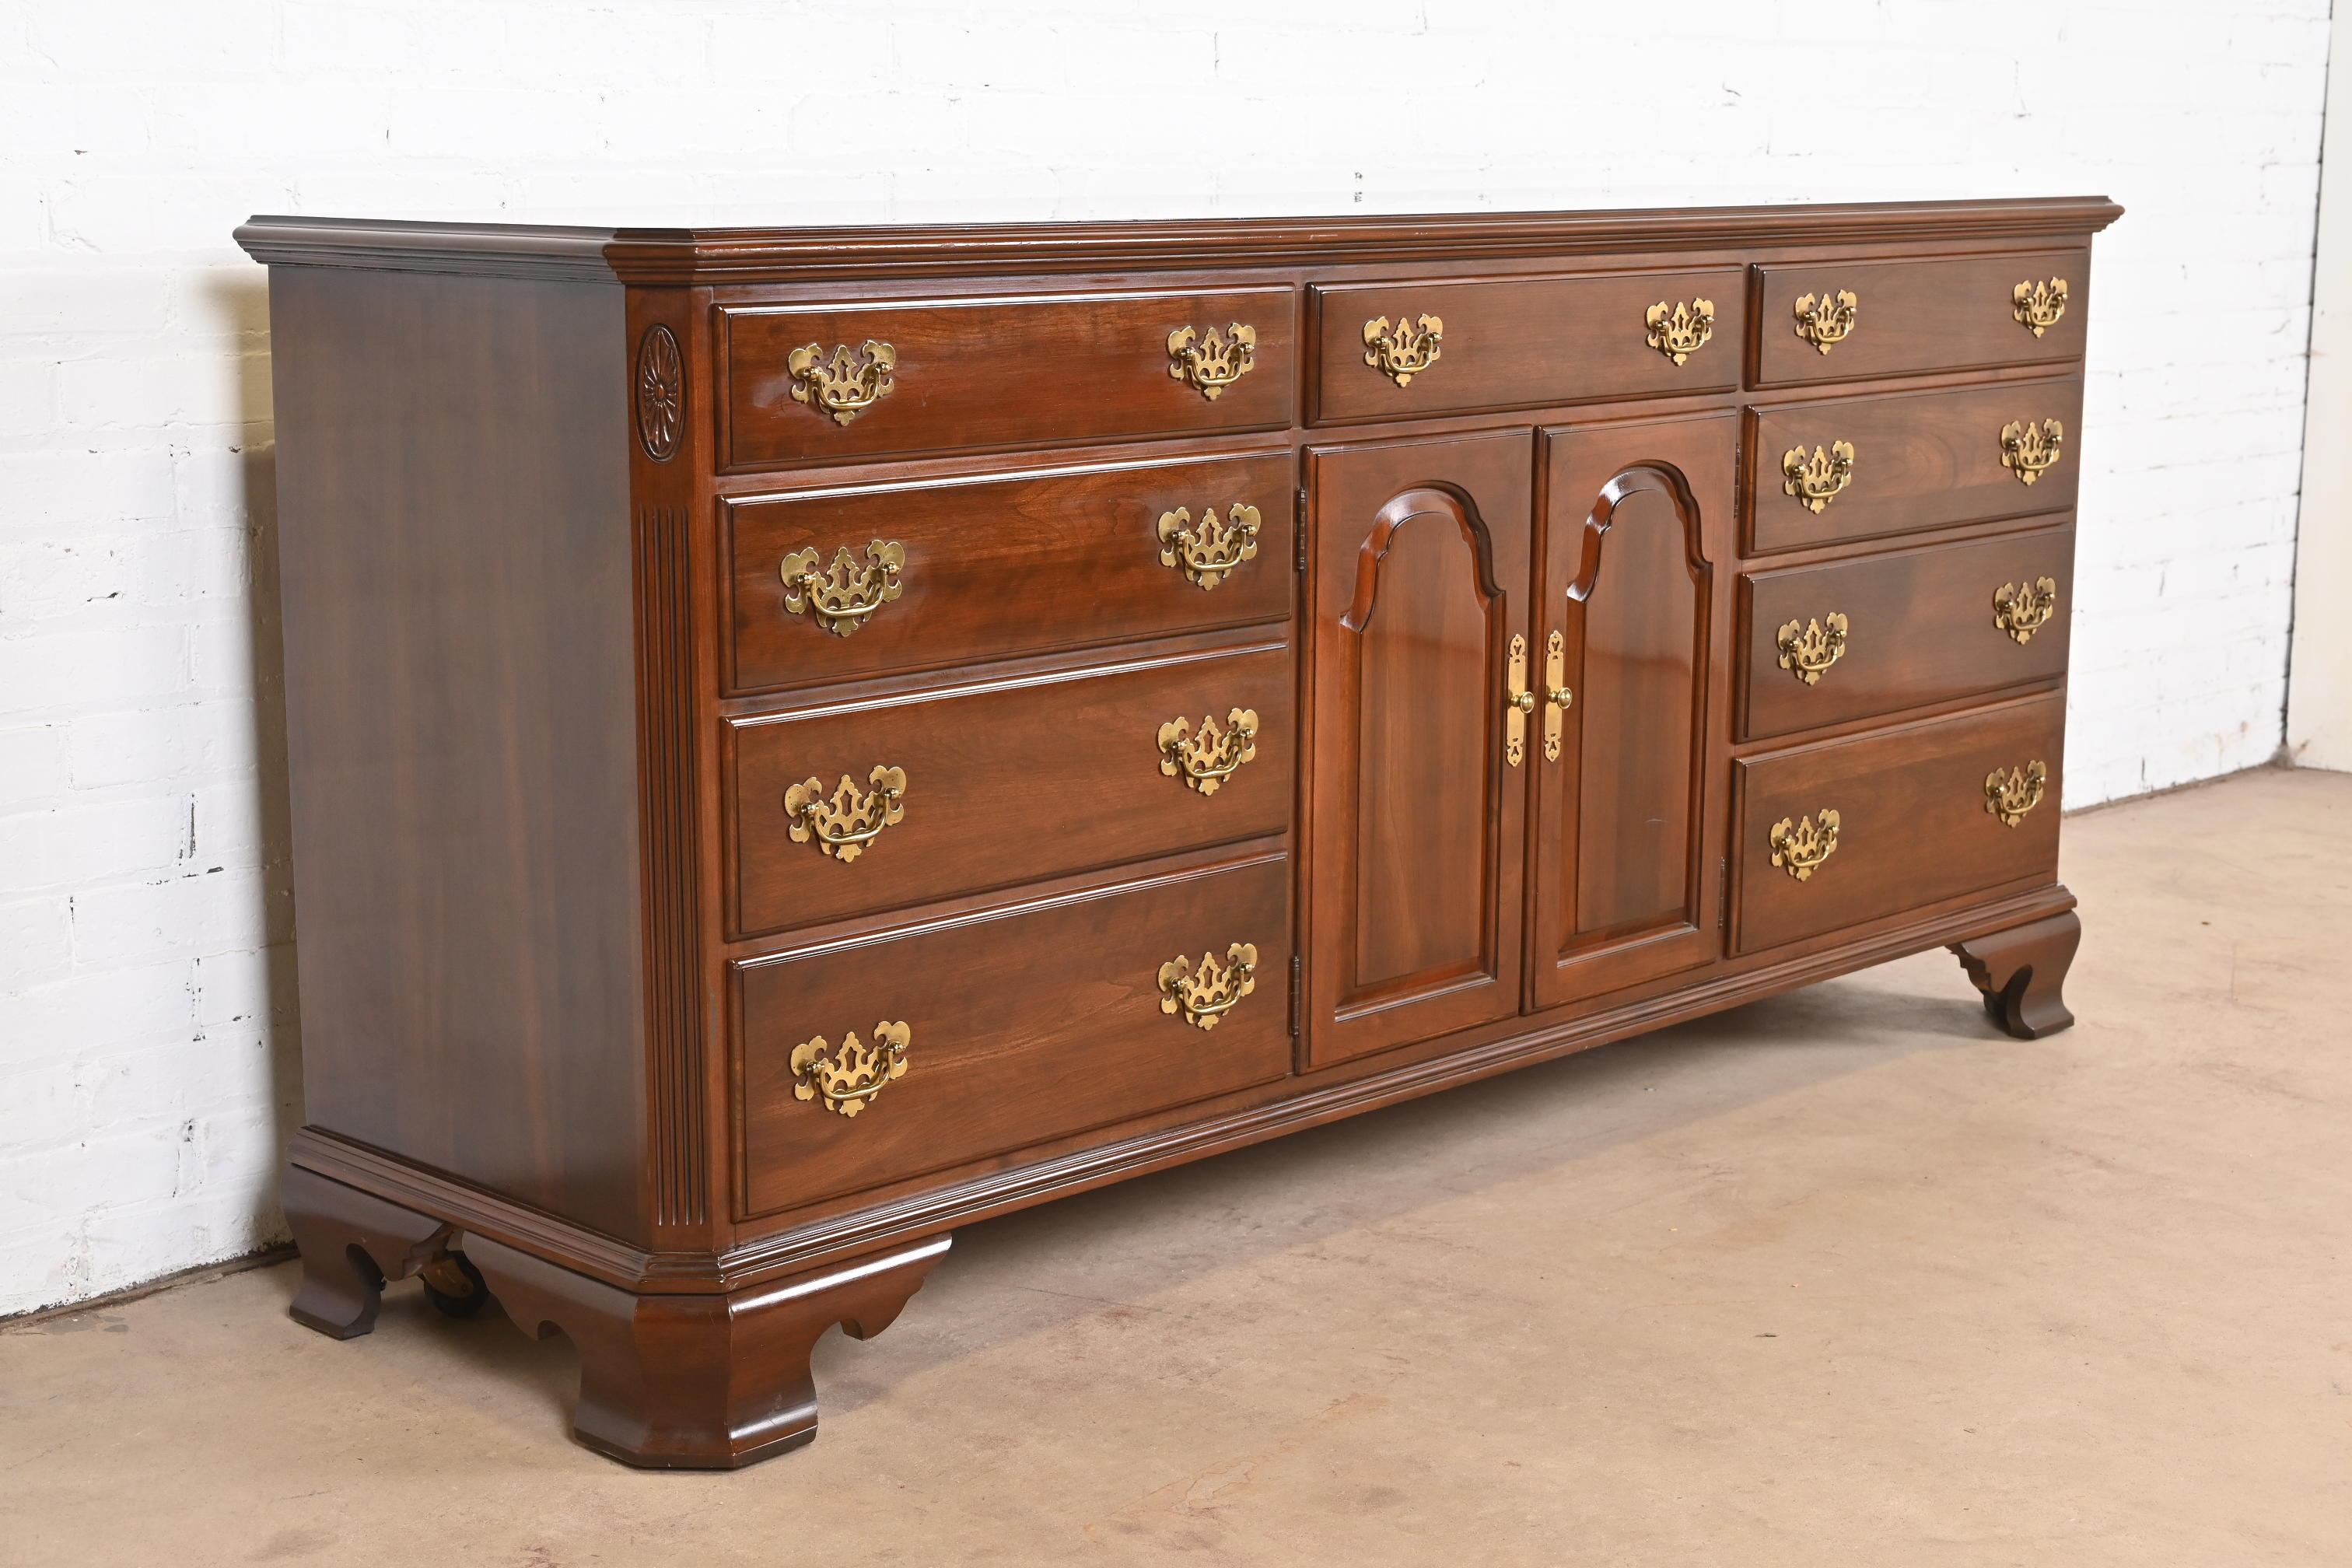 Brass Georgian Solid Cherry Wood Dresser or Credenza For Sale